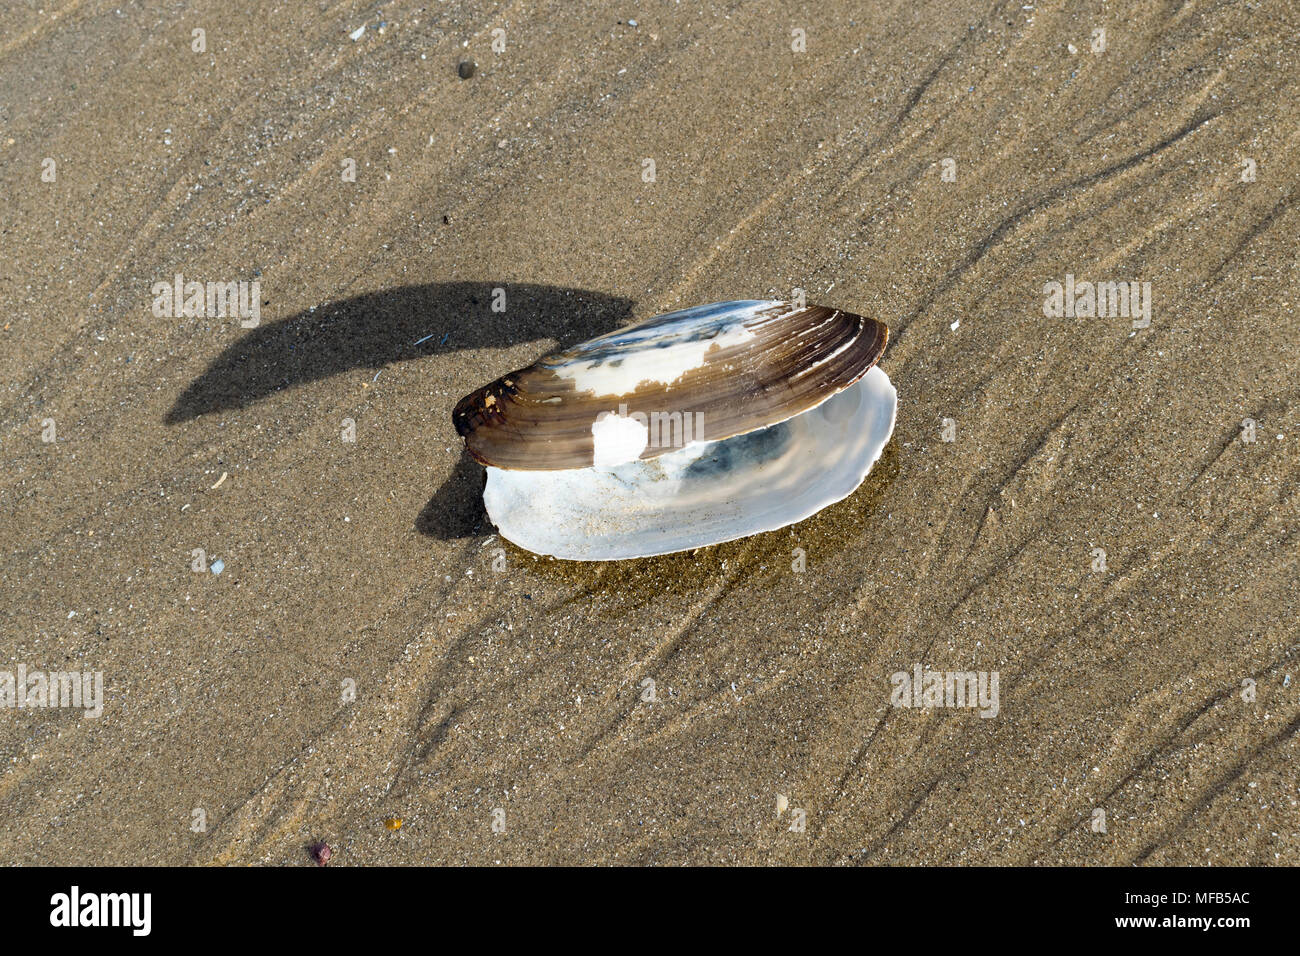 Common Otter Shell Lutraria lutraria Stock Photo